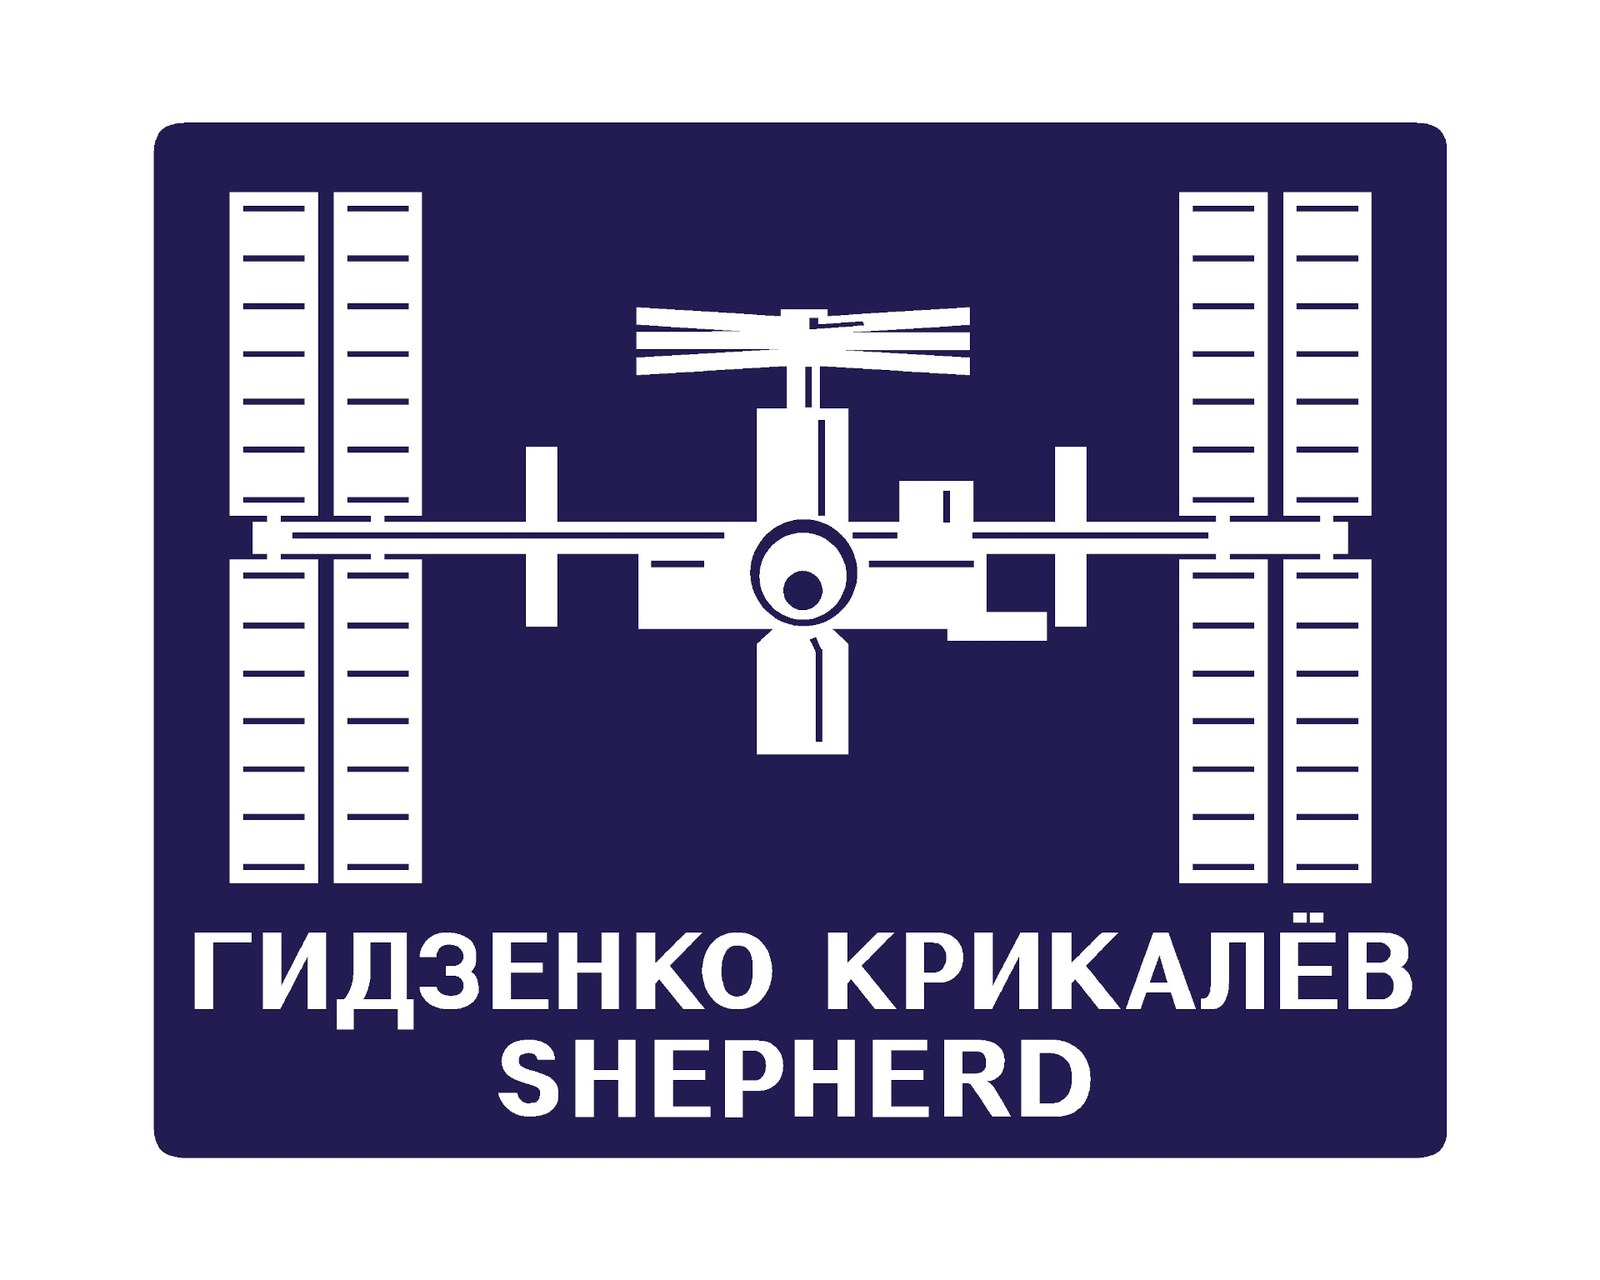 Expedition 1 mission patch